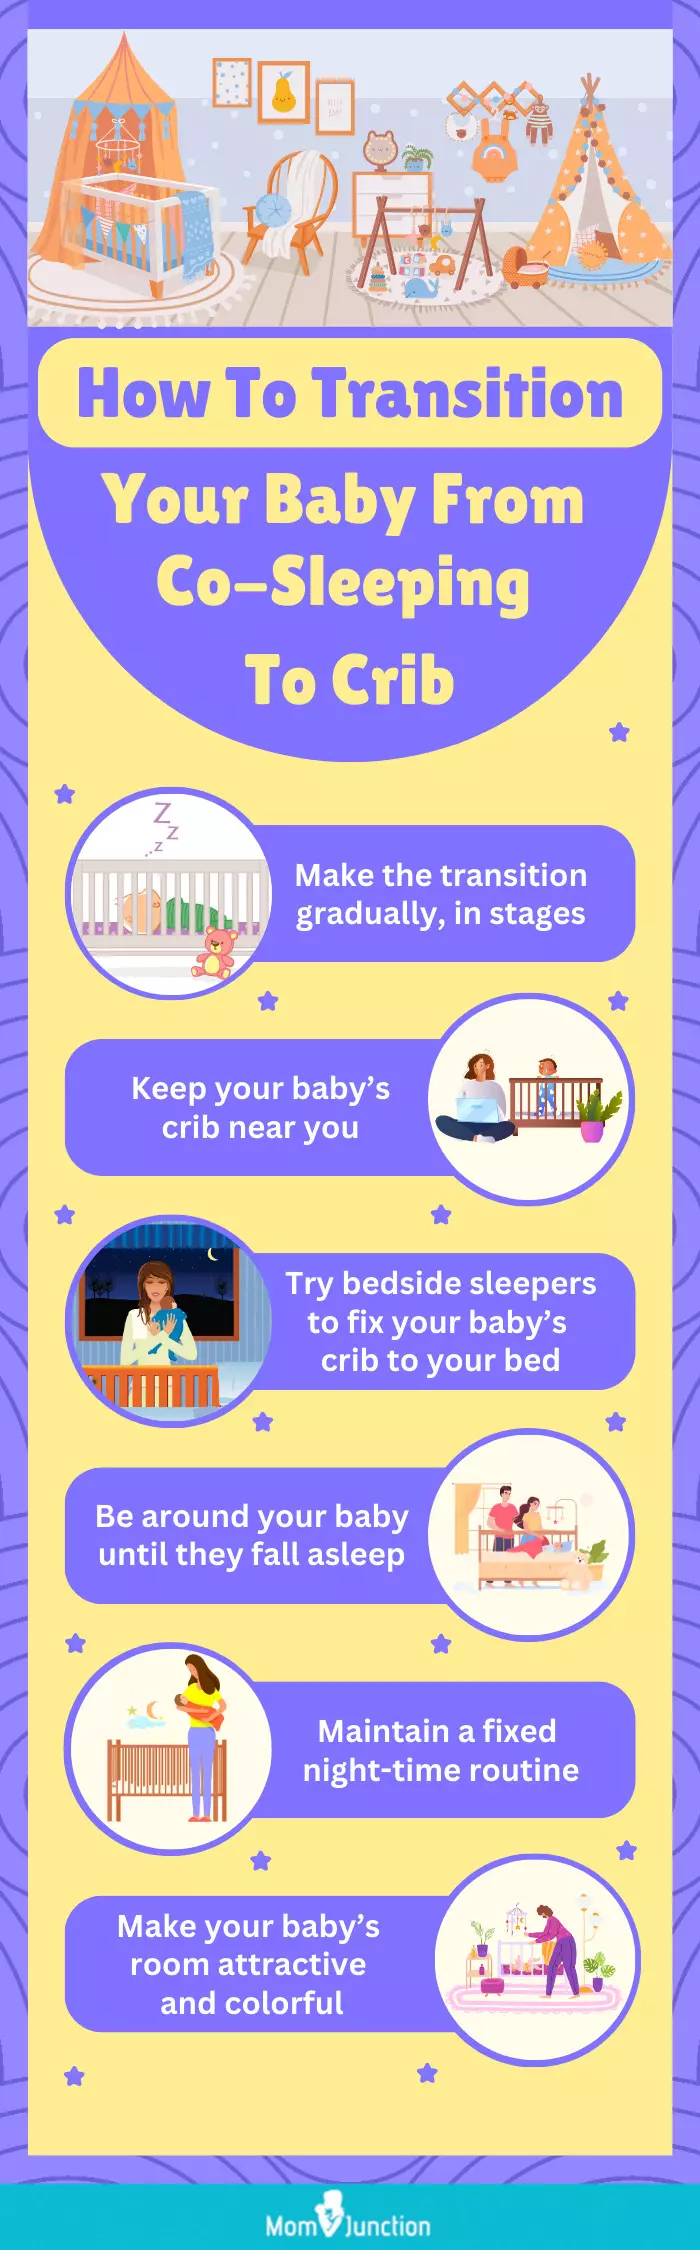 tips on transitioning babies from co-sleeping to crib (infographic)